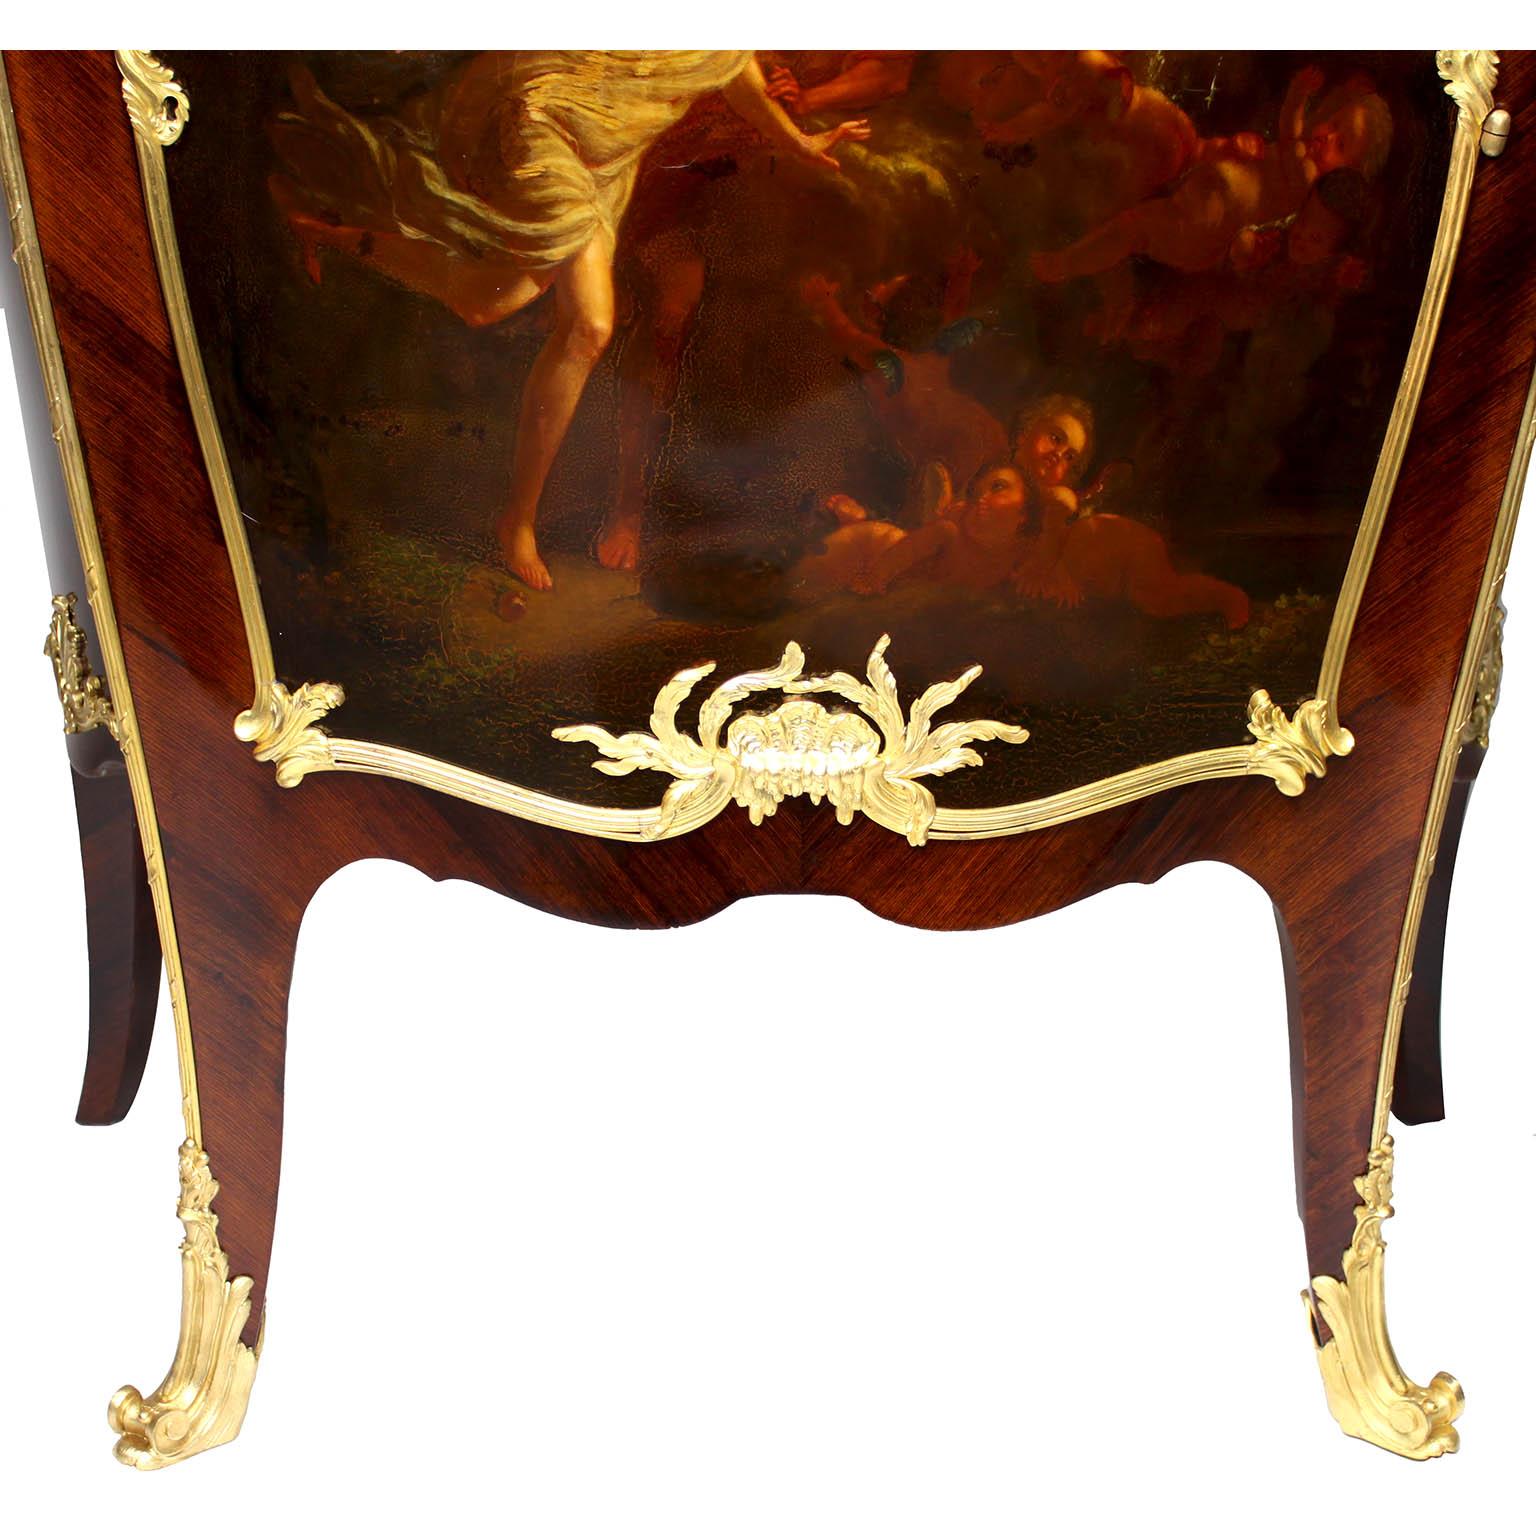 French 19th C. Louis XV Style Ormolu-Mounted Vernis Martin Cabinet by F. Linke For Sale 1